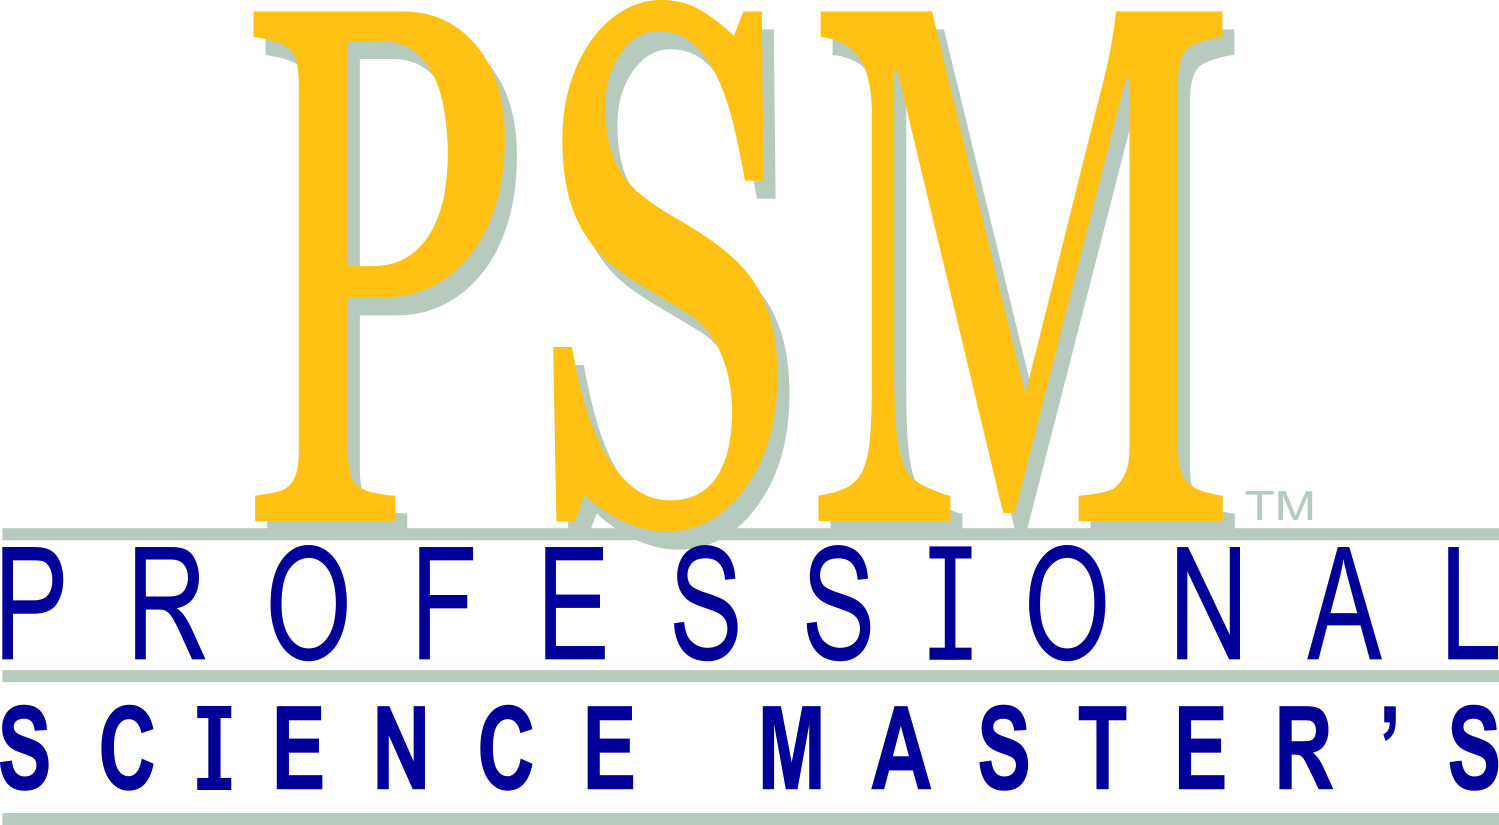 Professional Science Master's (PSMs)